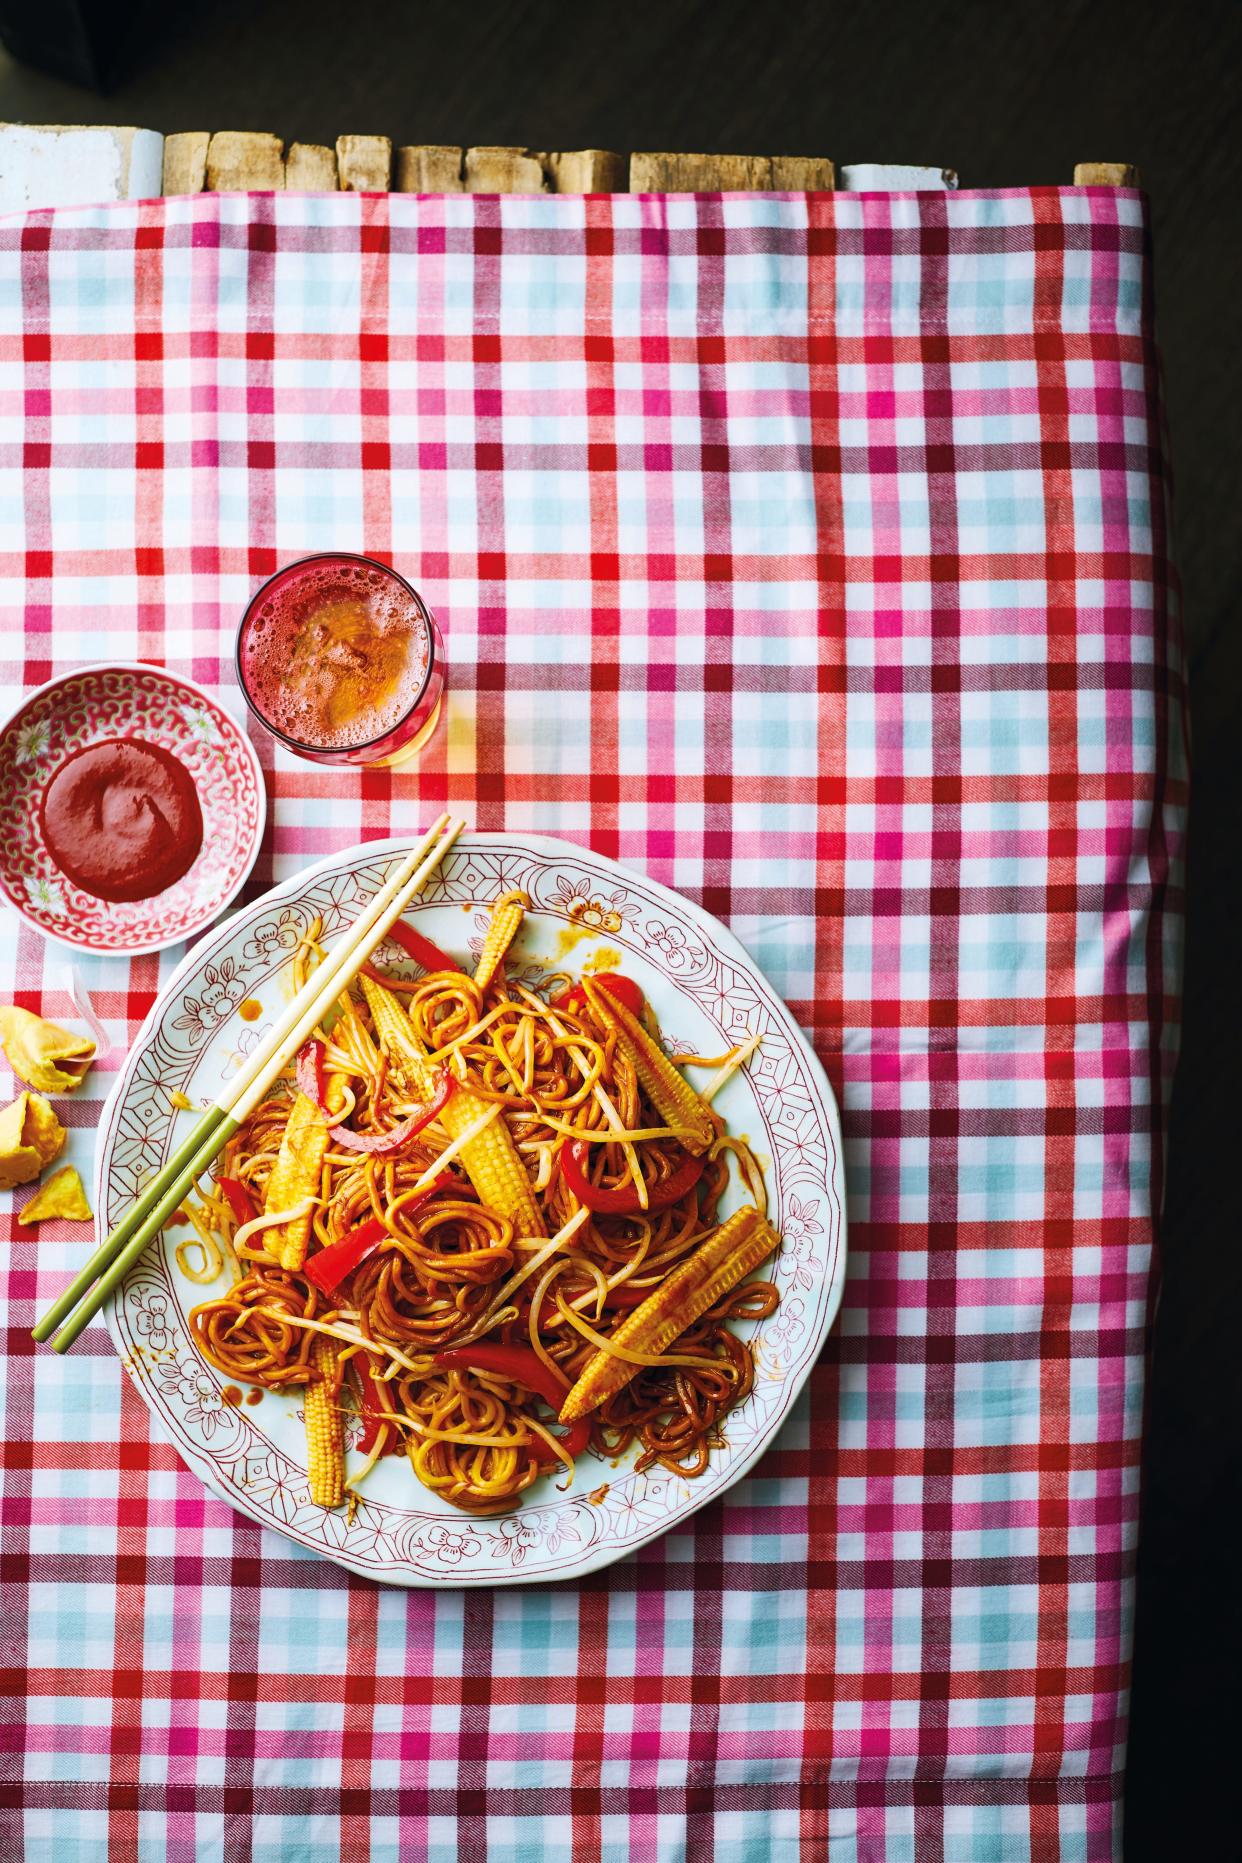 Siracha Lo Mein is one of the recipes featured in Kwoklyn Wan's new cookbook "The Complete Chinese Takeout Cookbook."